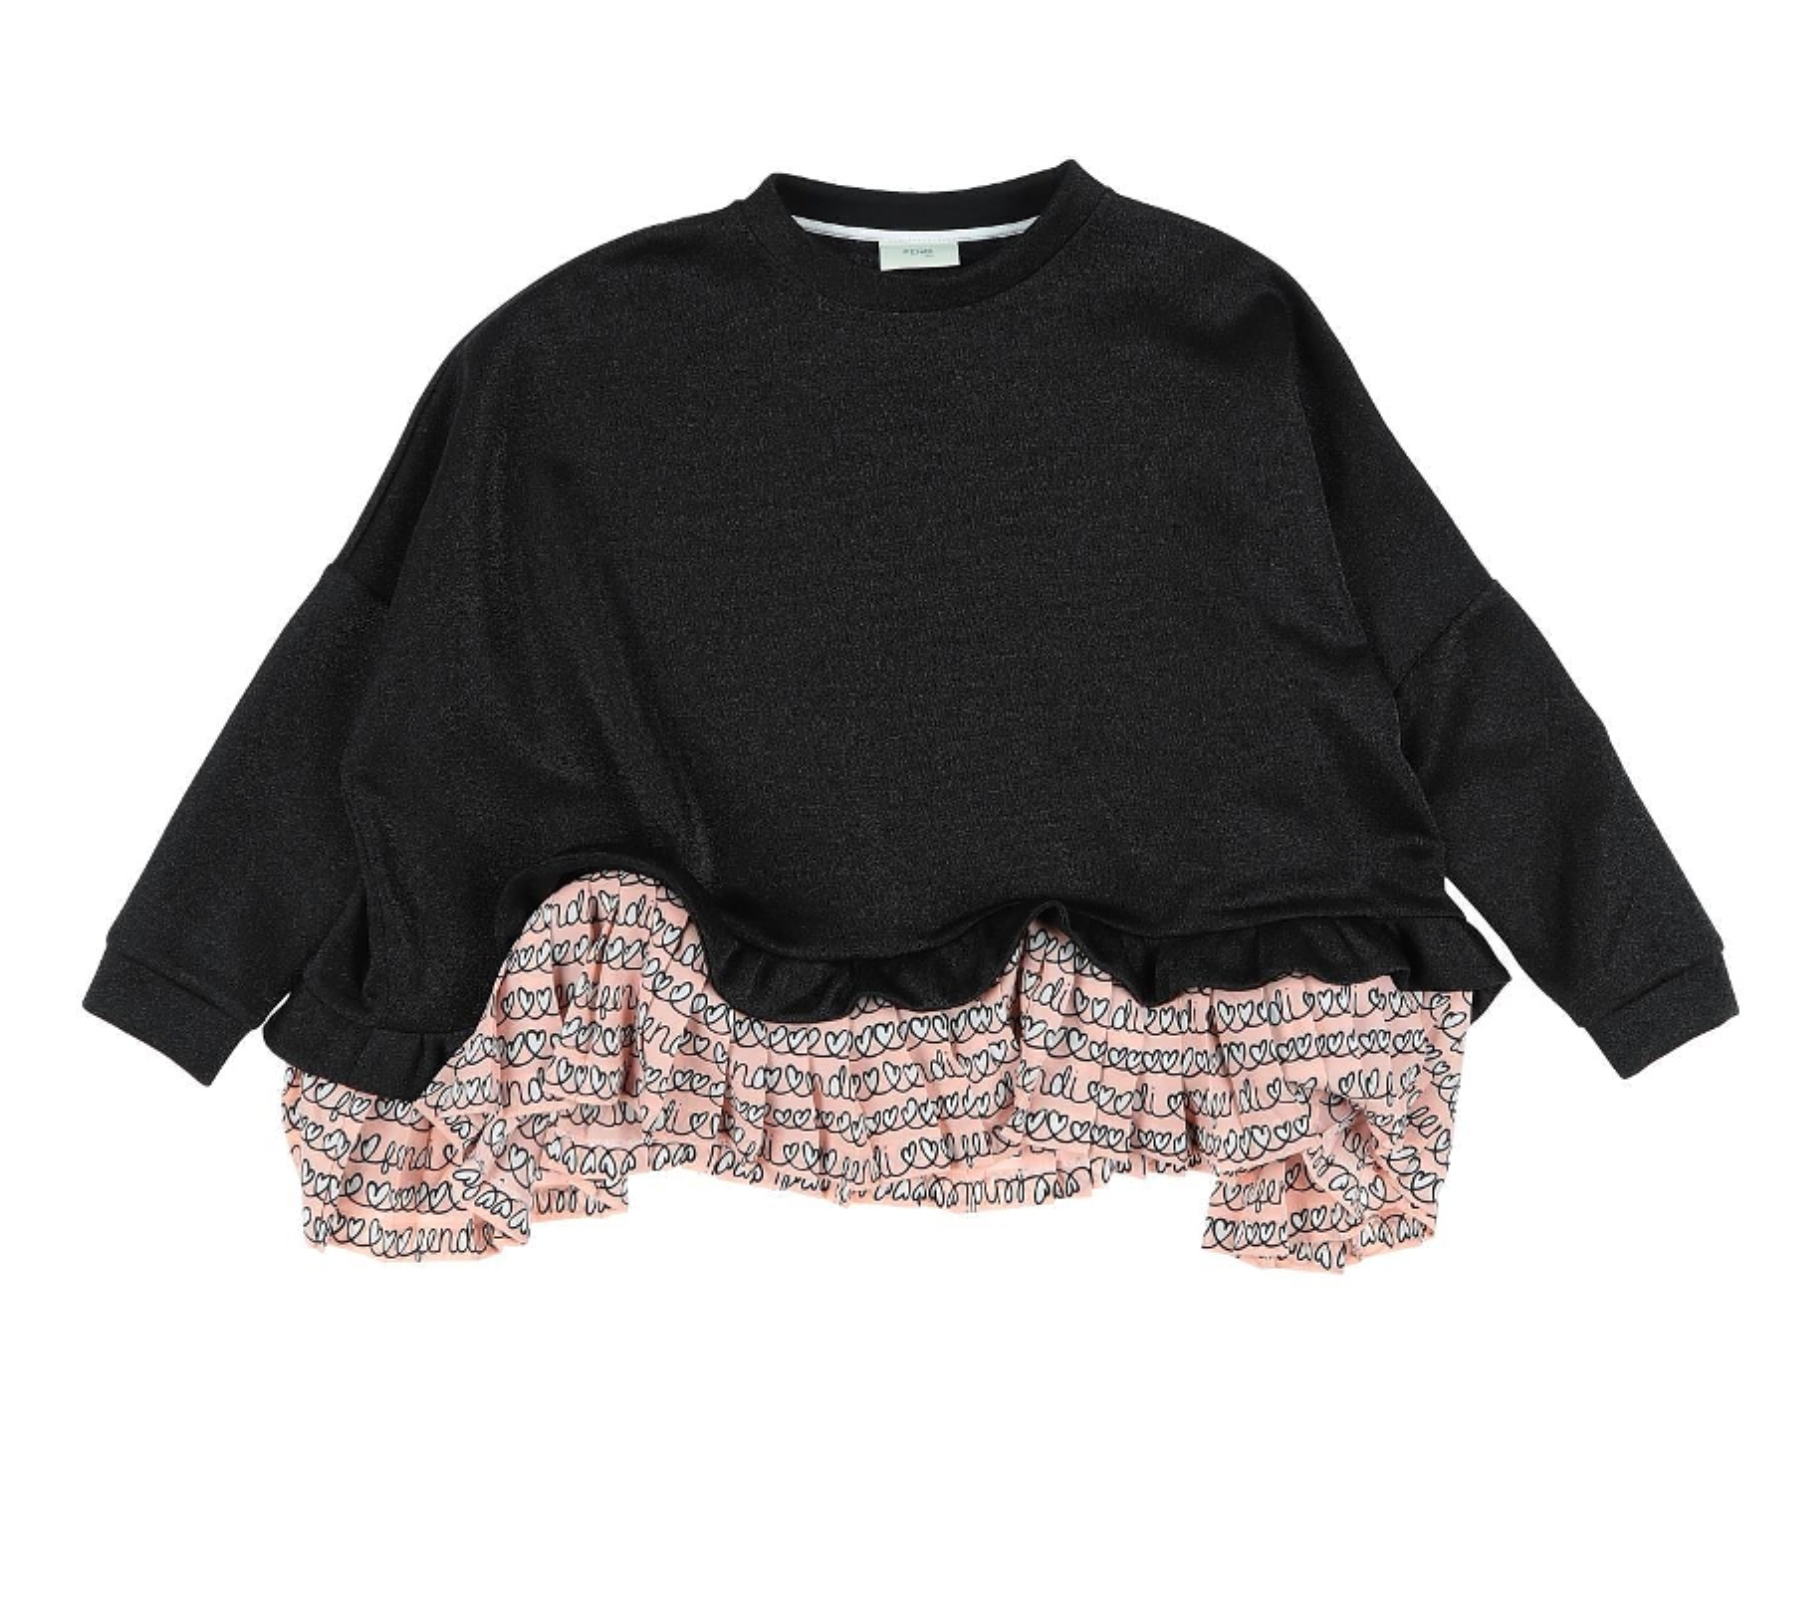 FENDI - Black and pink sweater with hearts - 5 years old